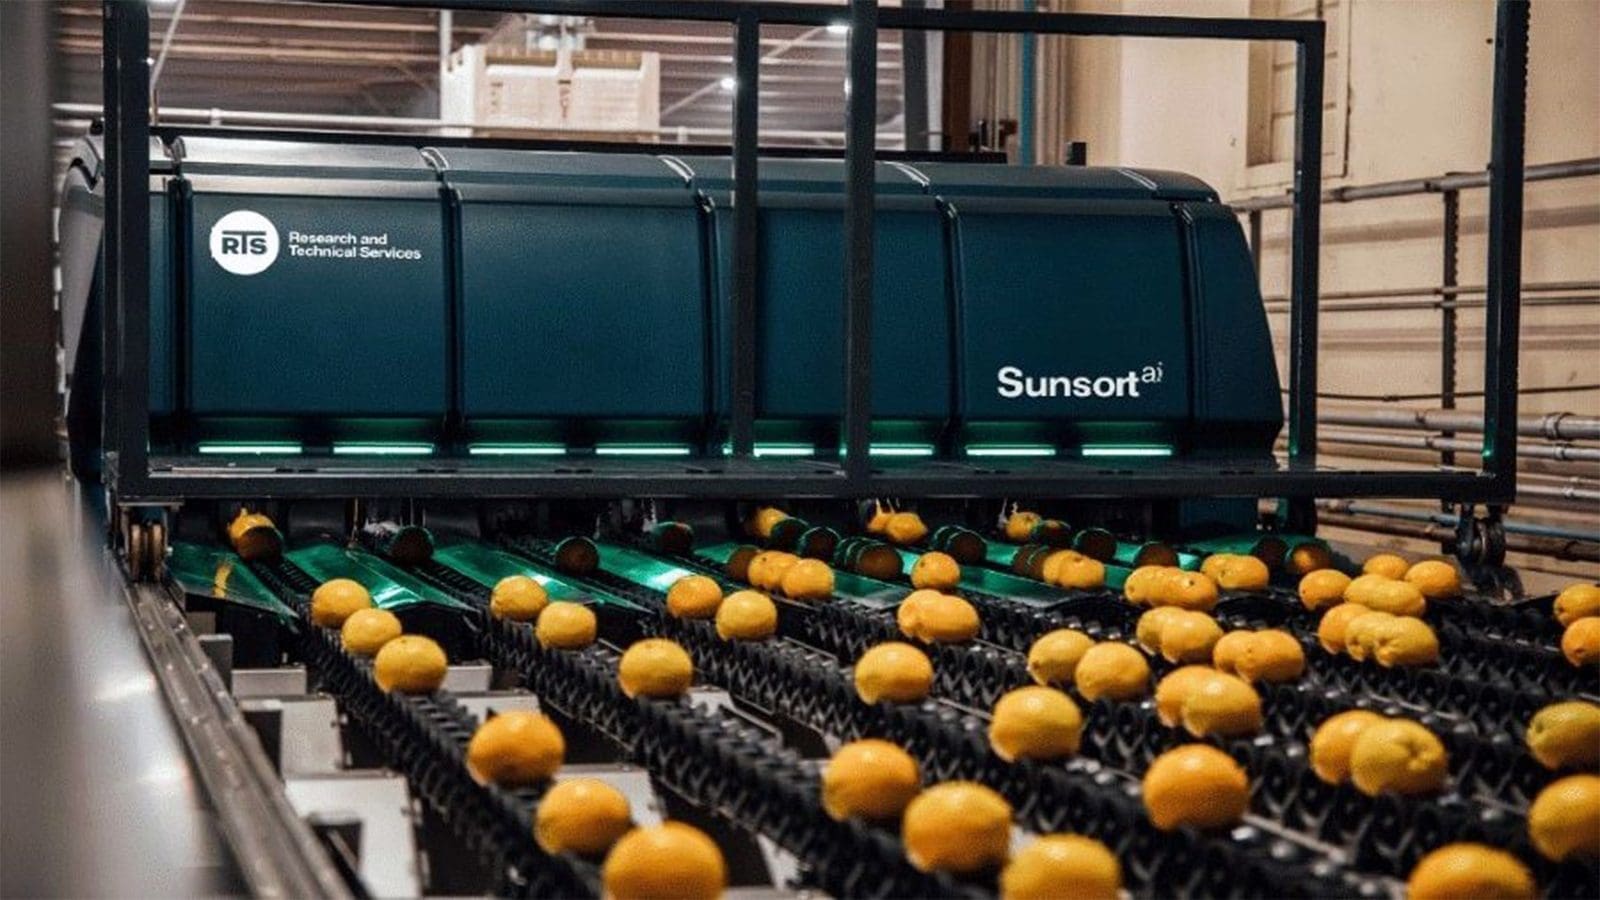 Sunkist Research and Technical Services launches AI powered sorter for citrus fruits